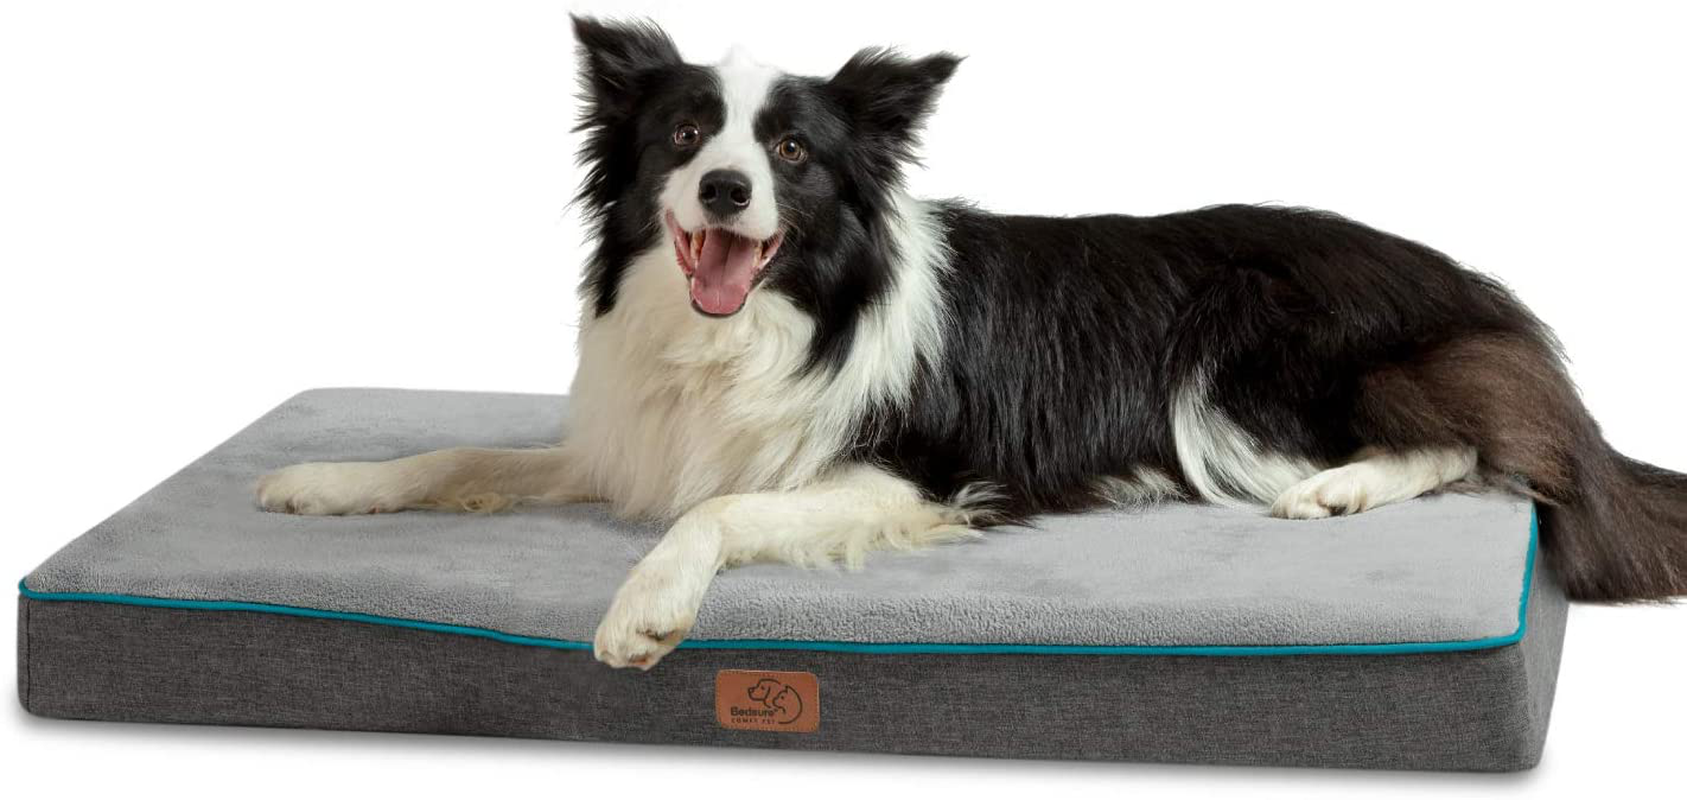 Bedsure Large Memory Foam Orthopedic Dog Bed - Washable Dog Bed Pillow for Crate with Removable Cover and Waterproof Liner - Plush Flannel Fleece Top Pet Bed with Nonskid Bottom for Medium, Large and Extra Large Dogs